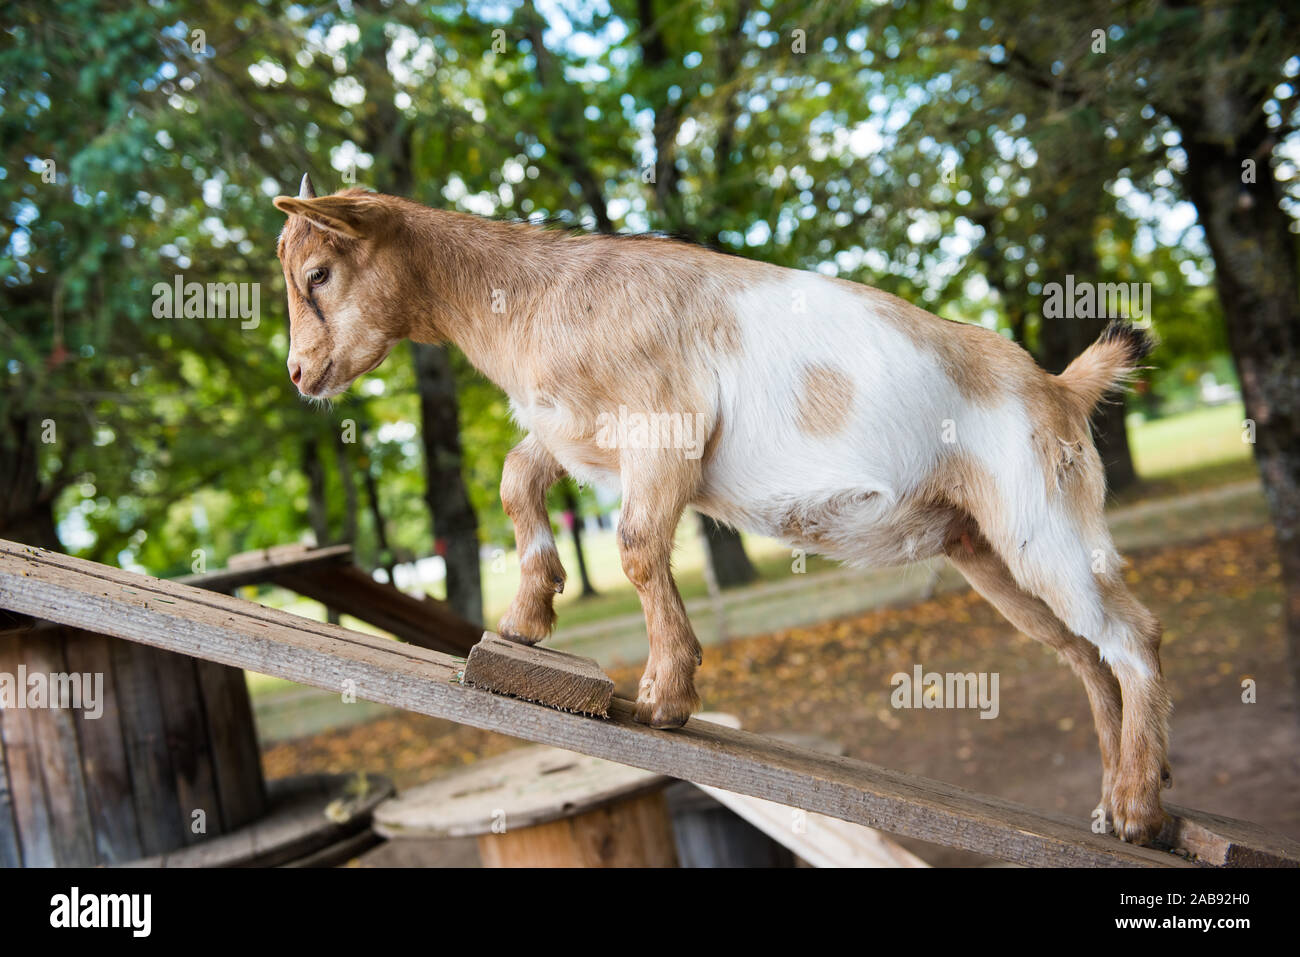 Funny brown goat is trying to walk up on wooden boards Stock Photo